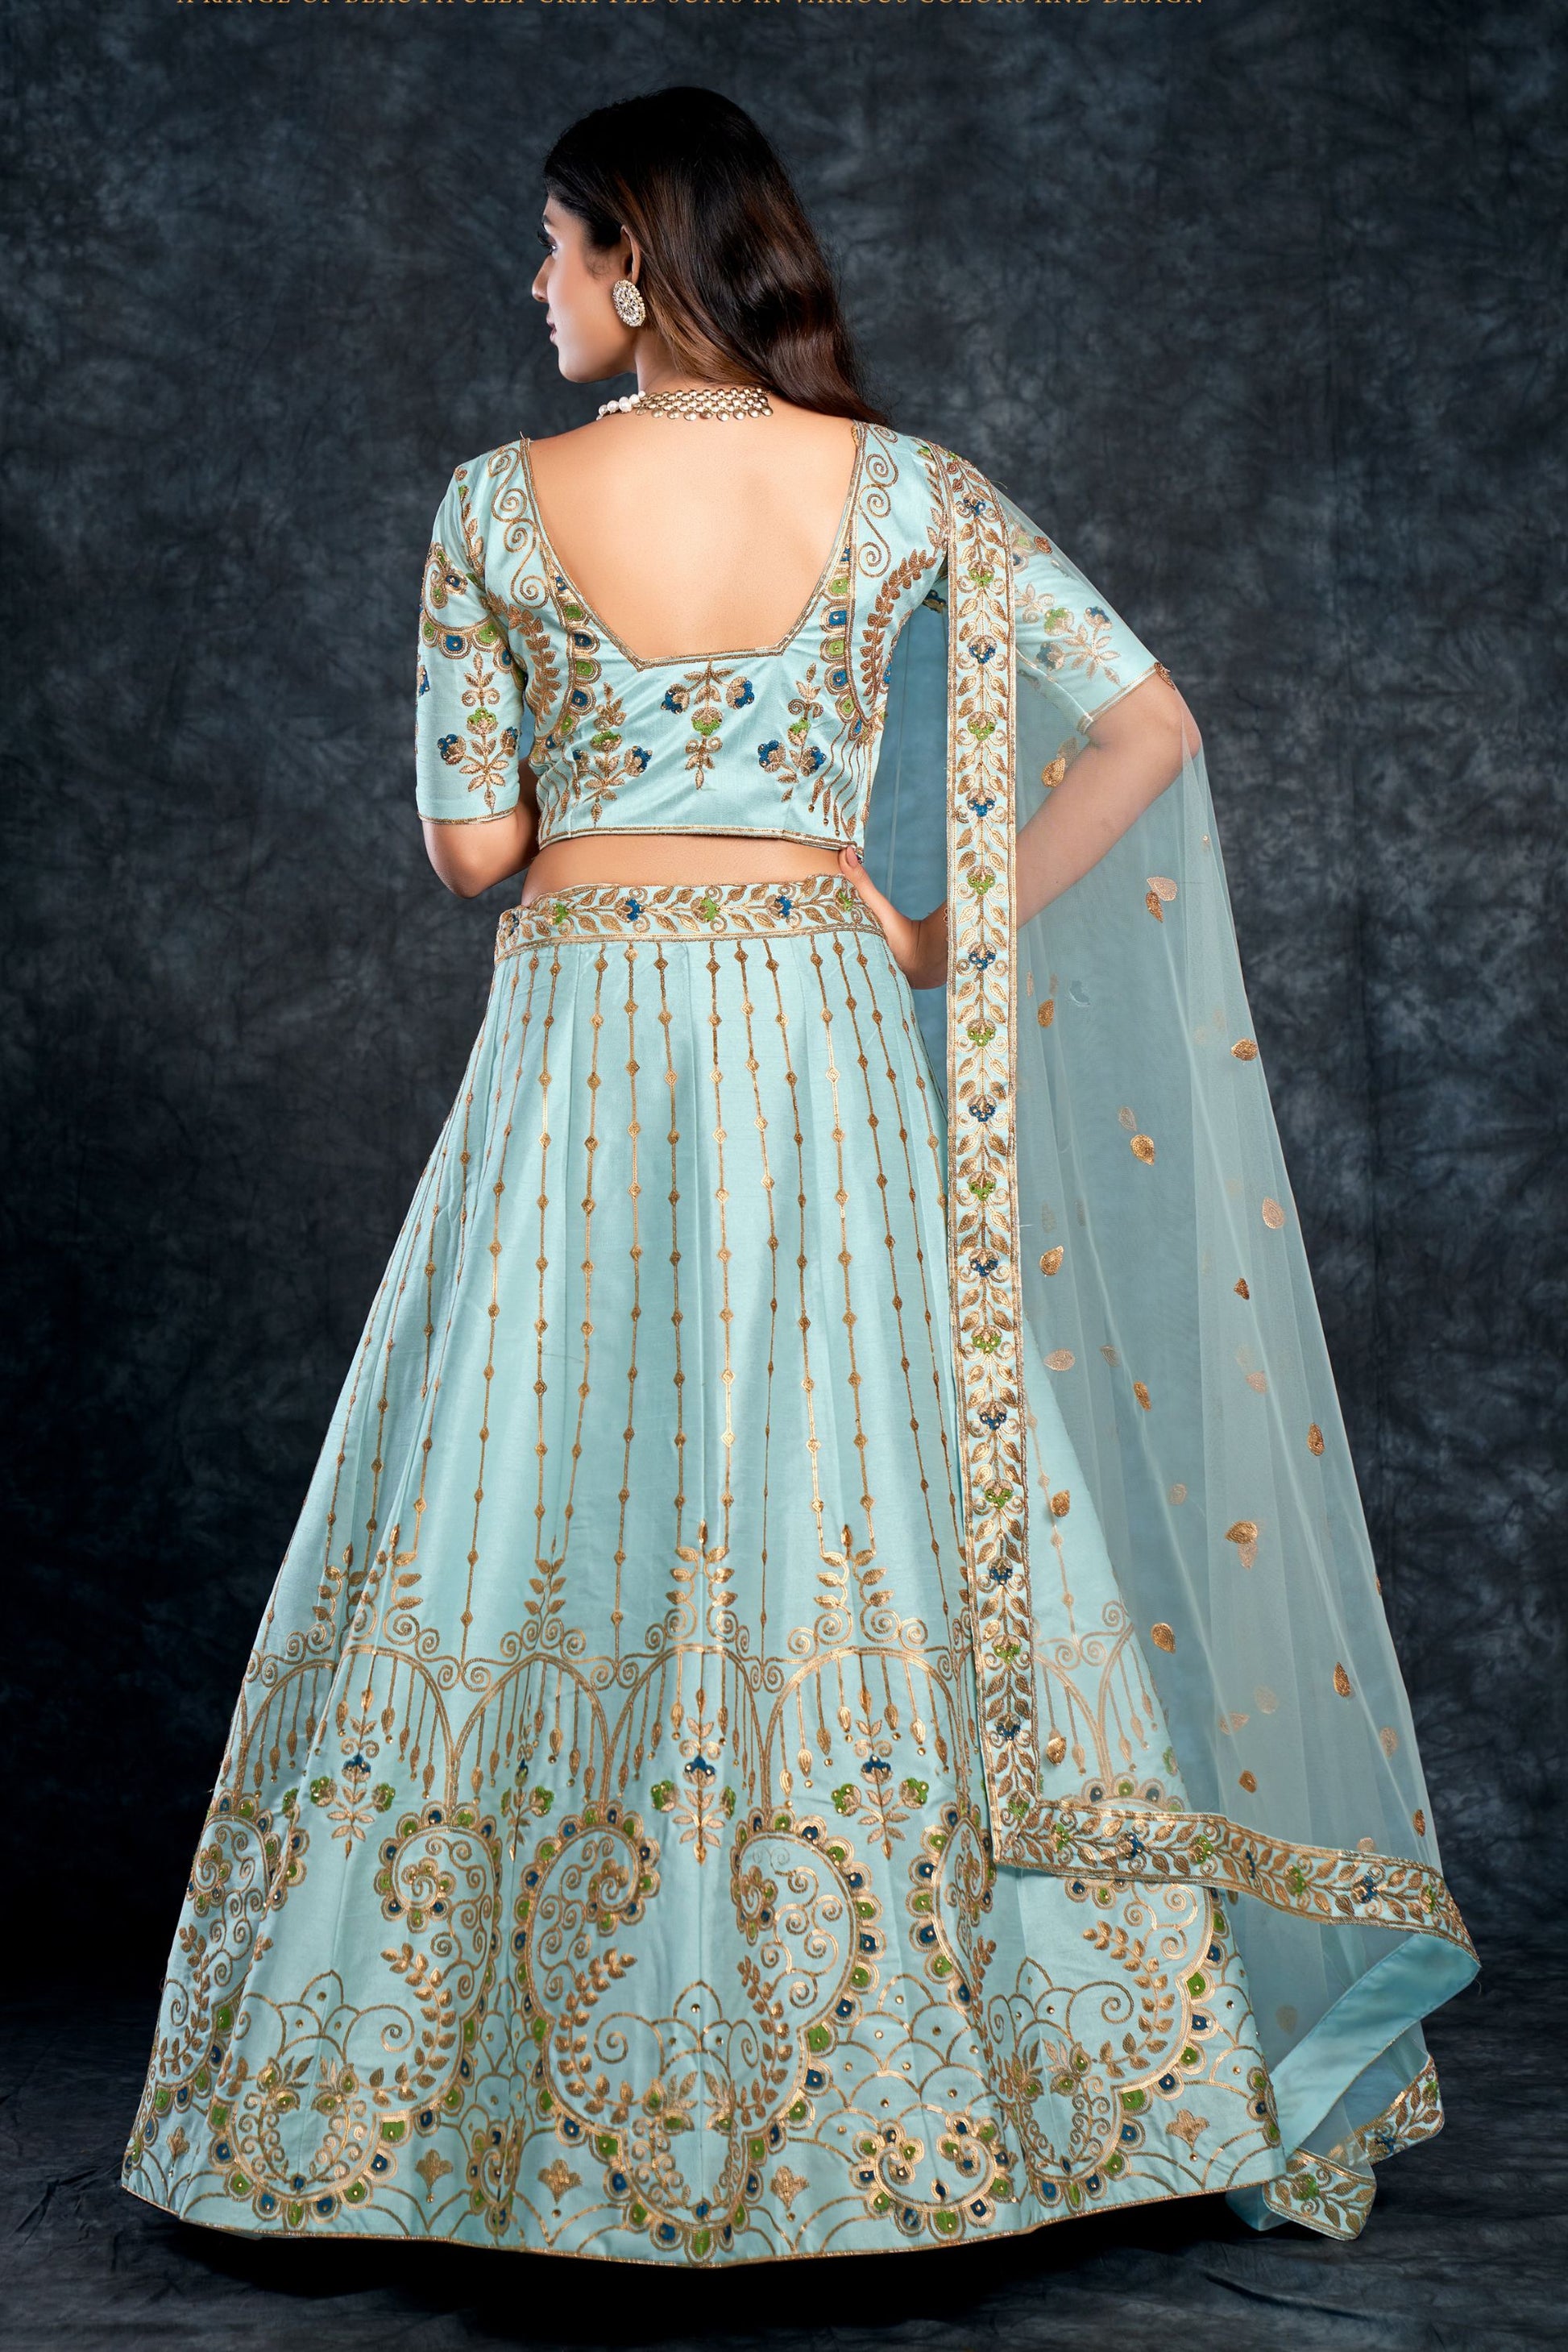 Sky Blue Indian Silk Lehenga Choli For Indian Festivals & Weddings - Sequence Embroidery Work, Thread Embroidery Work, Stone Work, Zari Work